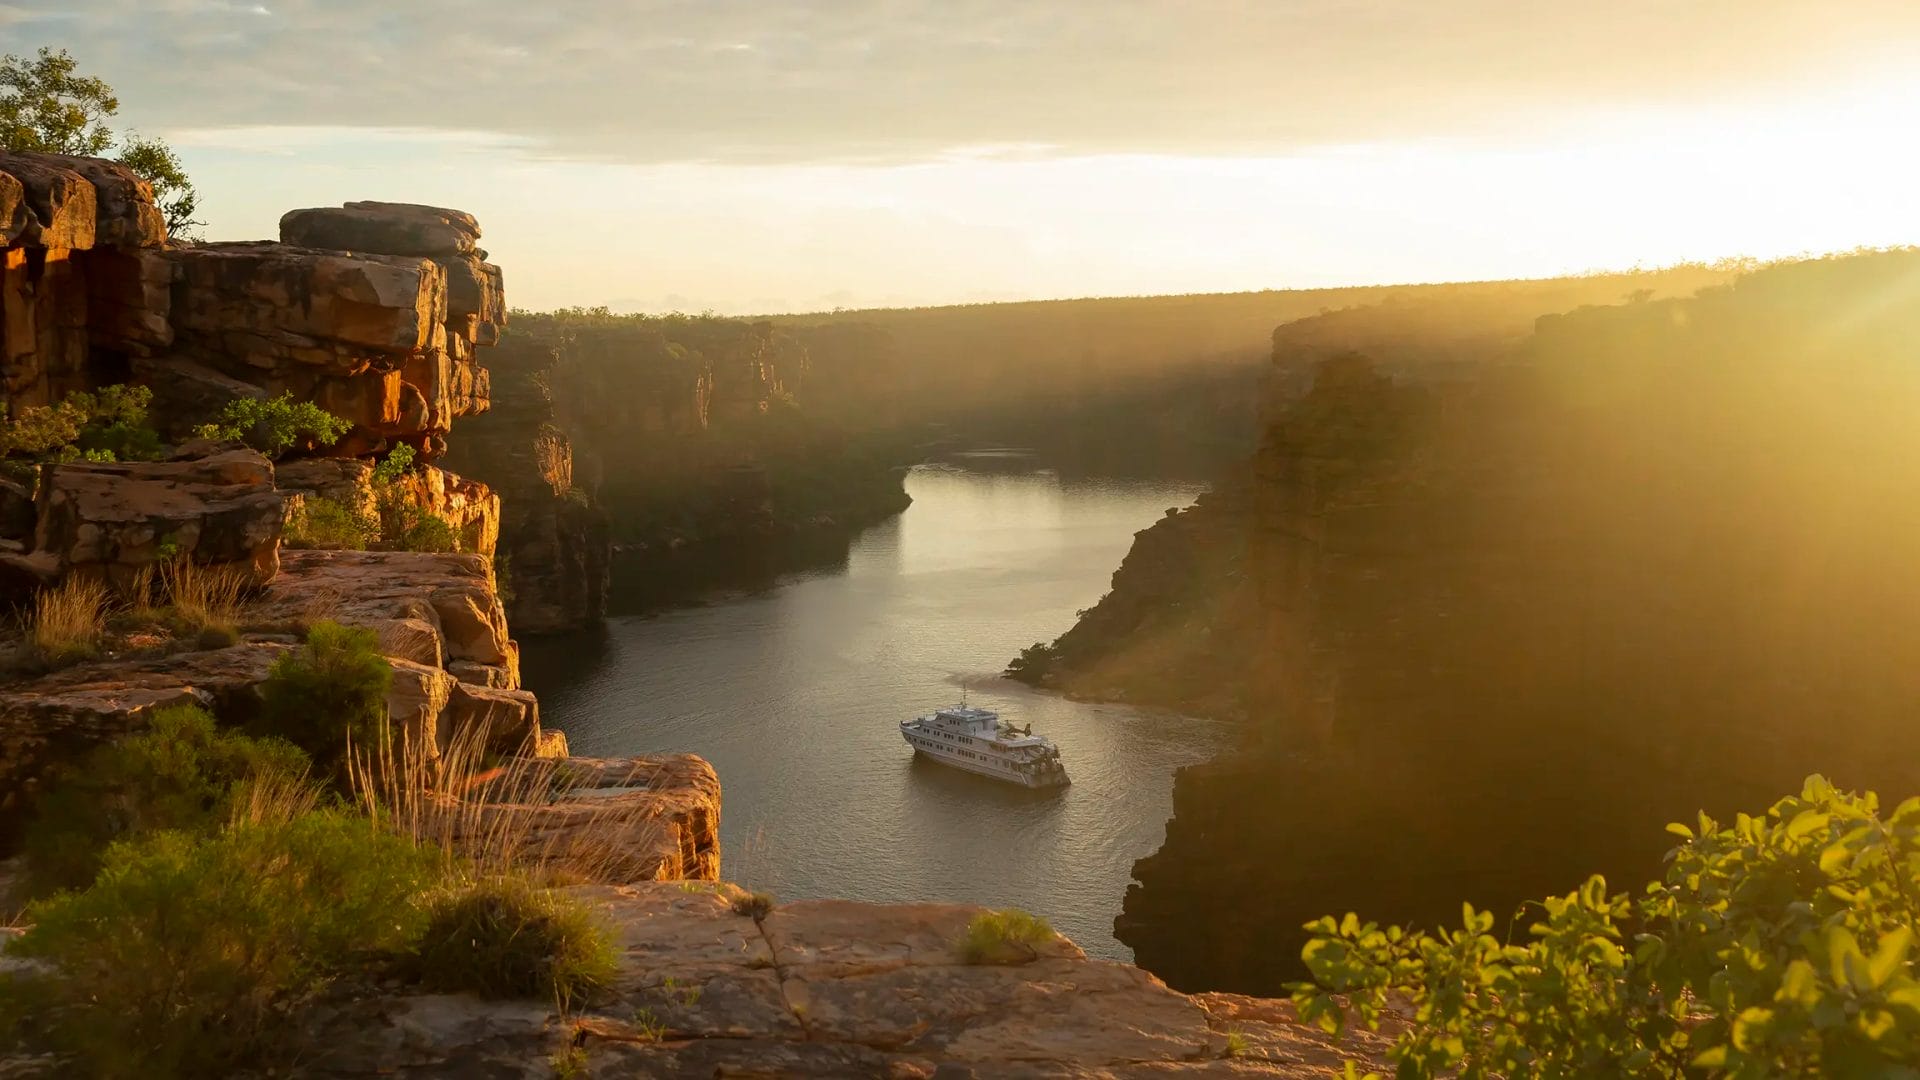 True North vessel within two steep gorges in the Kimberley, Western Australia, at golden hour